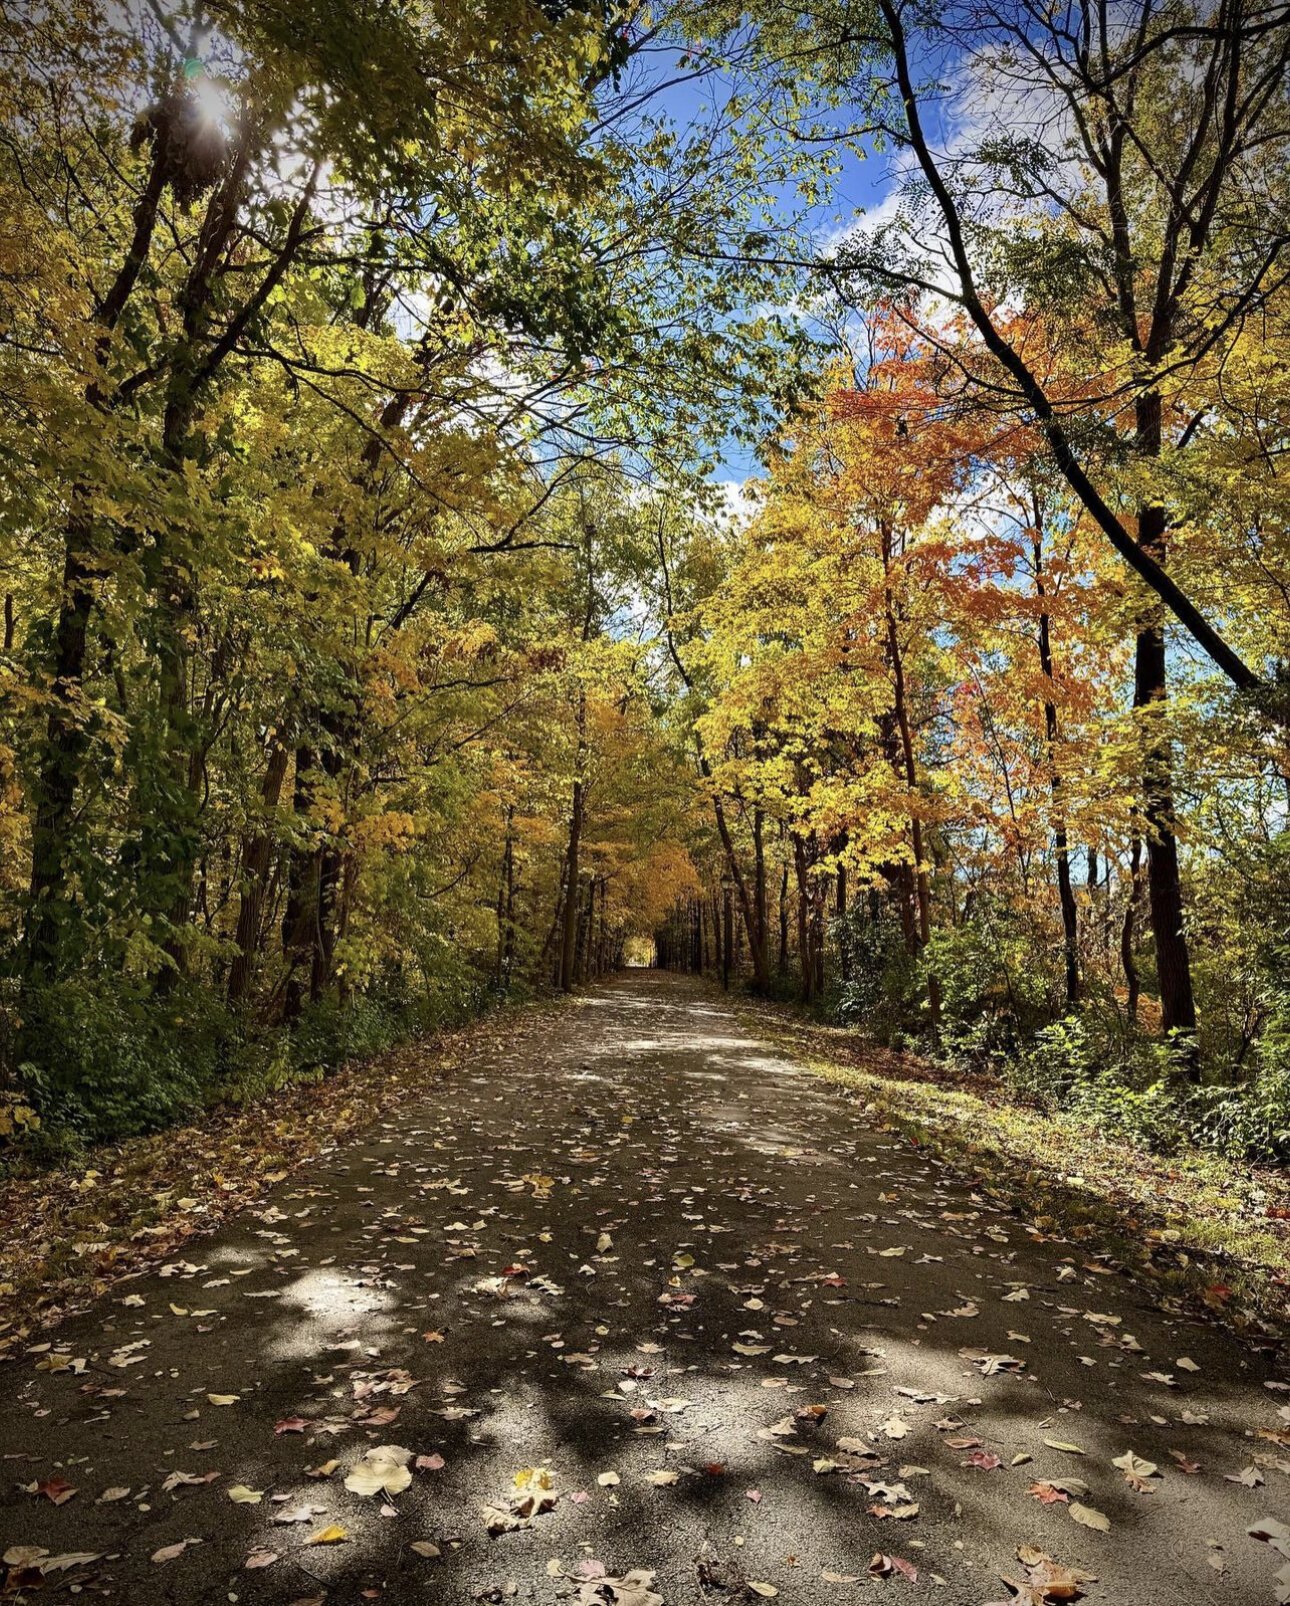 The Pufferbelly Trail is a segment of the pathway that will eventually go from Pokagon State Park in Angola to Ouabache State Park in Bluffton.